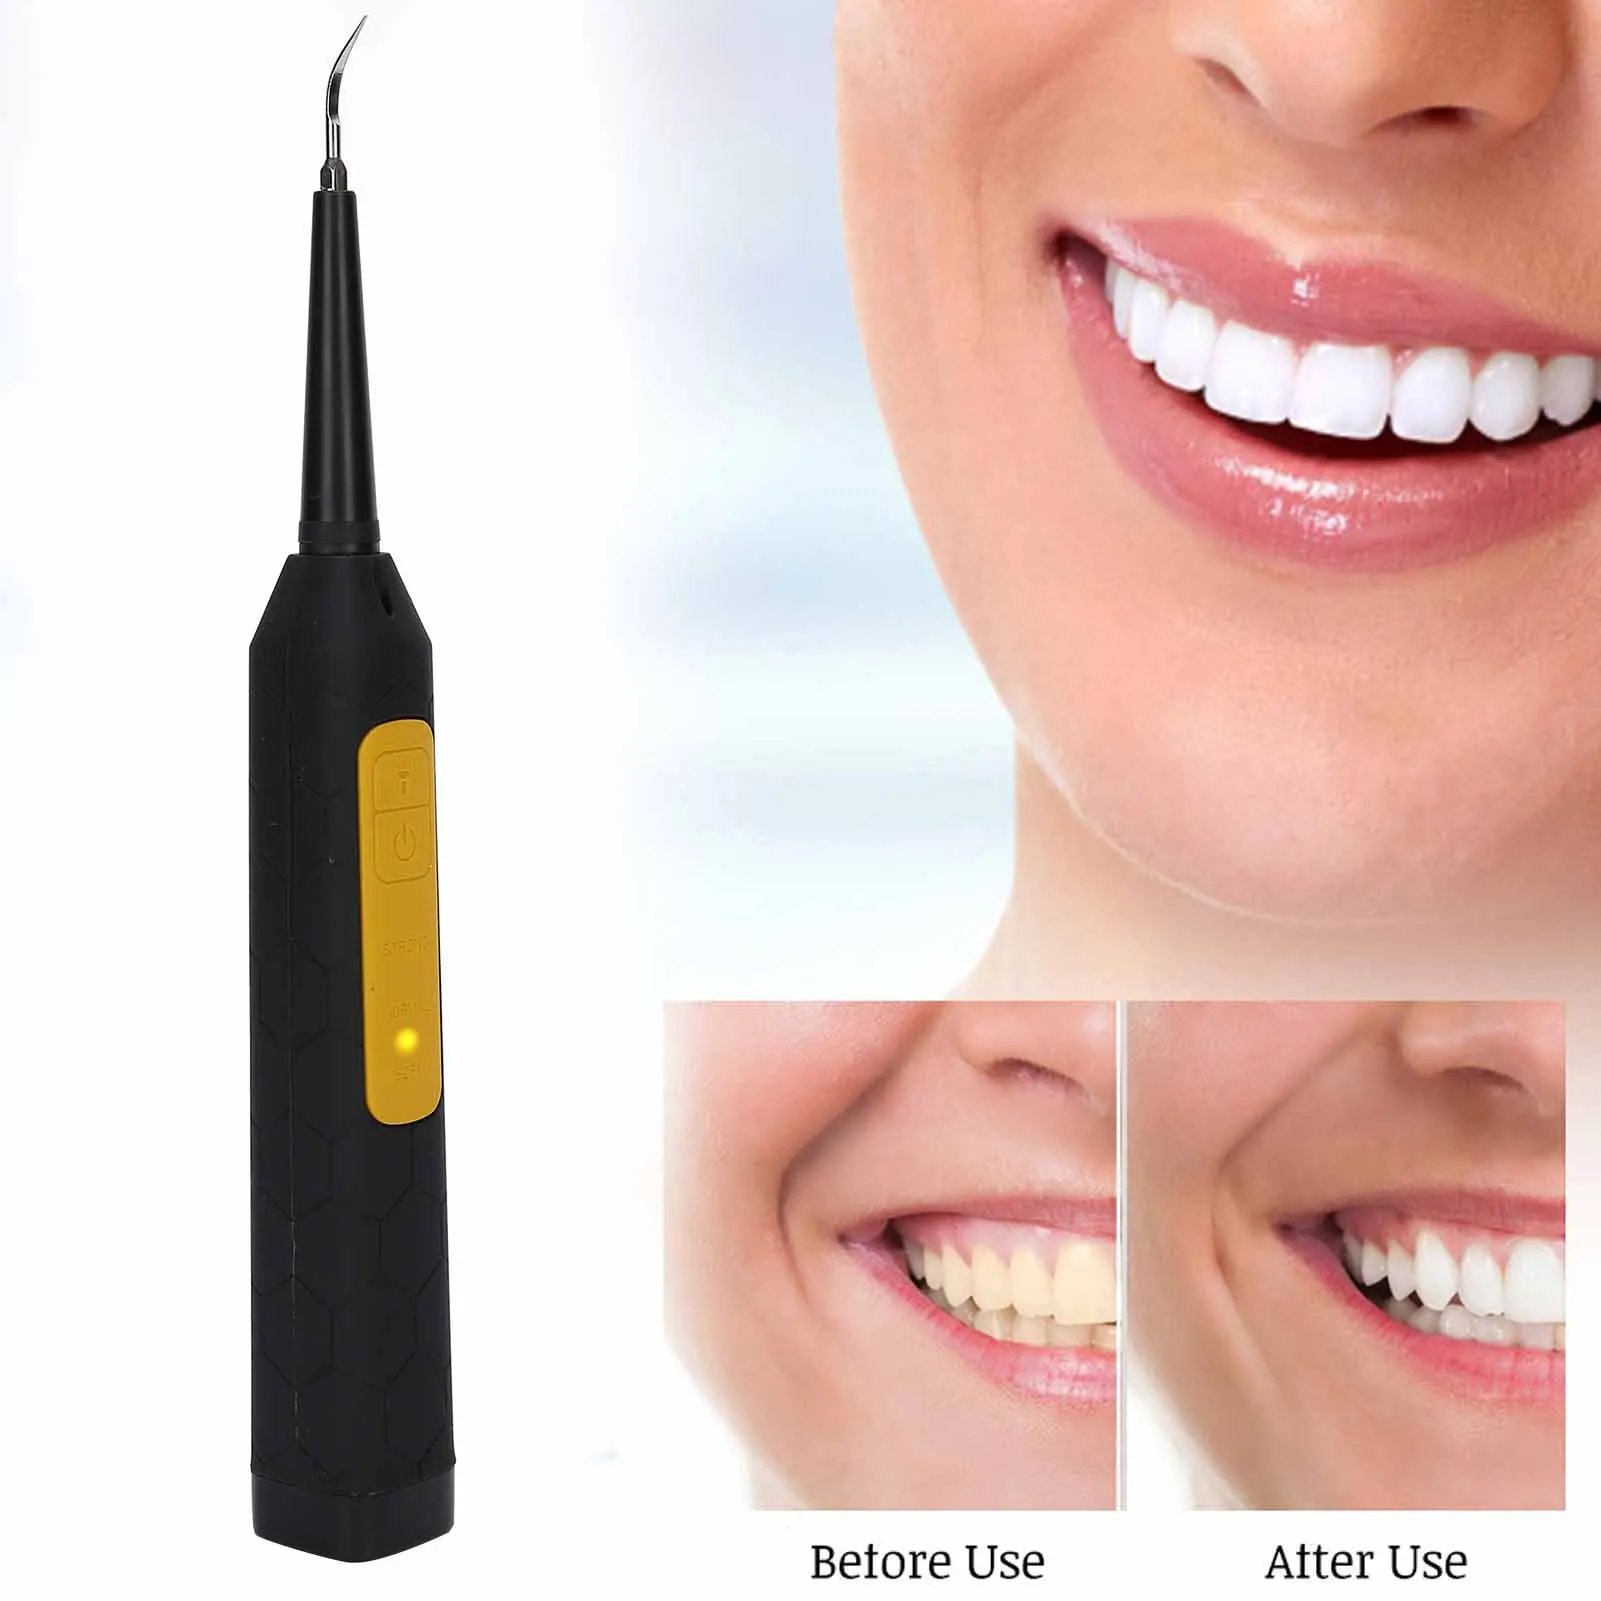 HighQuality Stainless Steel Head Tooth Cleaner Electric Calculus Remover Portable Teeth Tartar Remover Oral Care Tool USB Charg 3d printer parts 2gt timing pulley 32 tooth wheel 5mm 6mm 6 35mm 8mm 10mm hole aluminum gear 32 teeth width 6mm 10mm repair tool